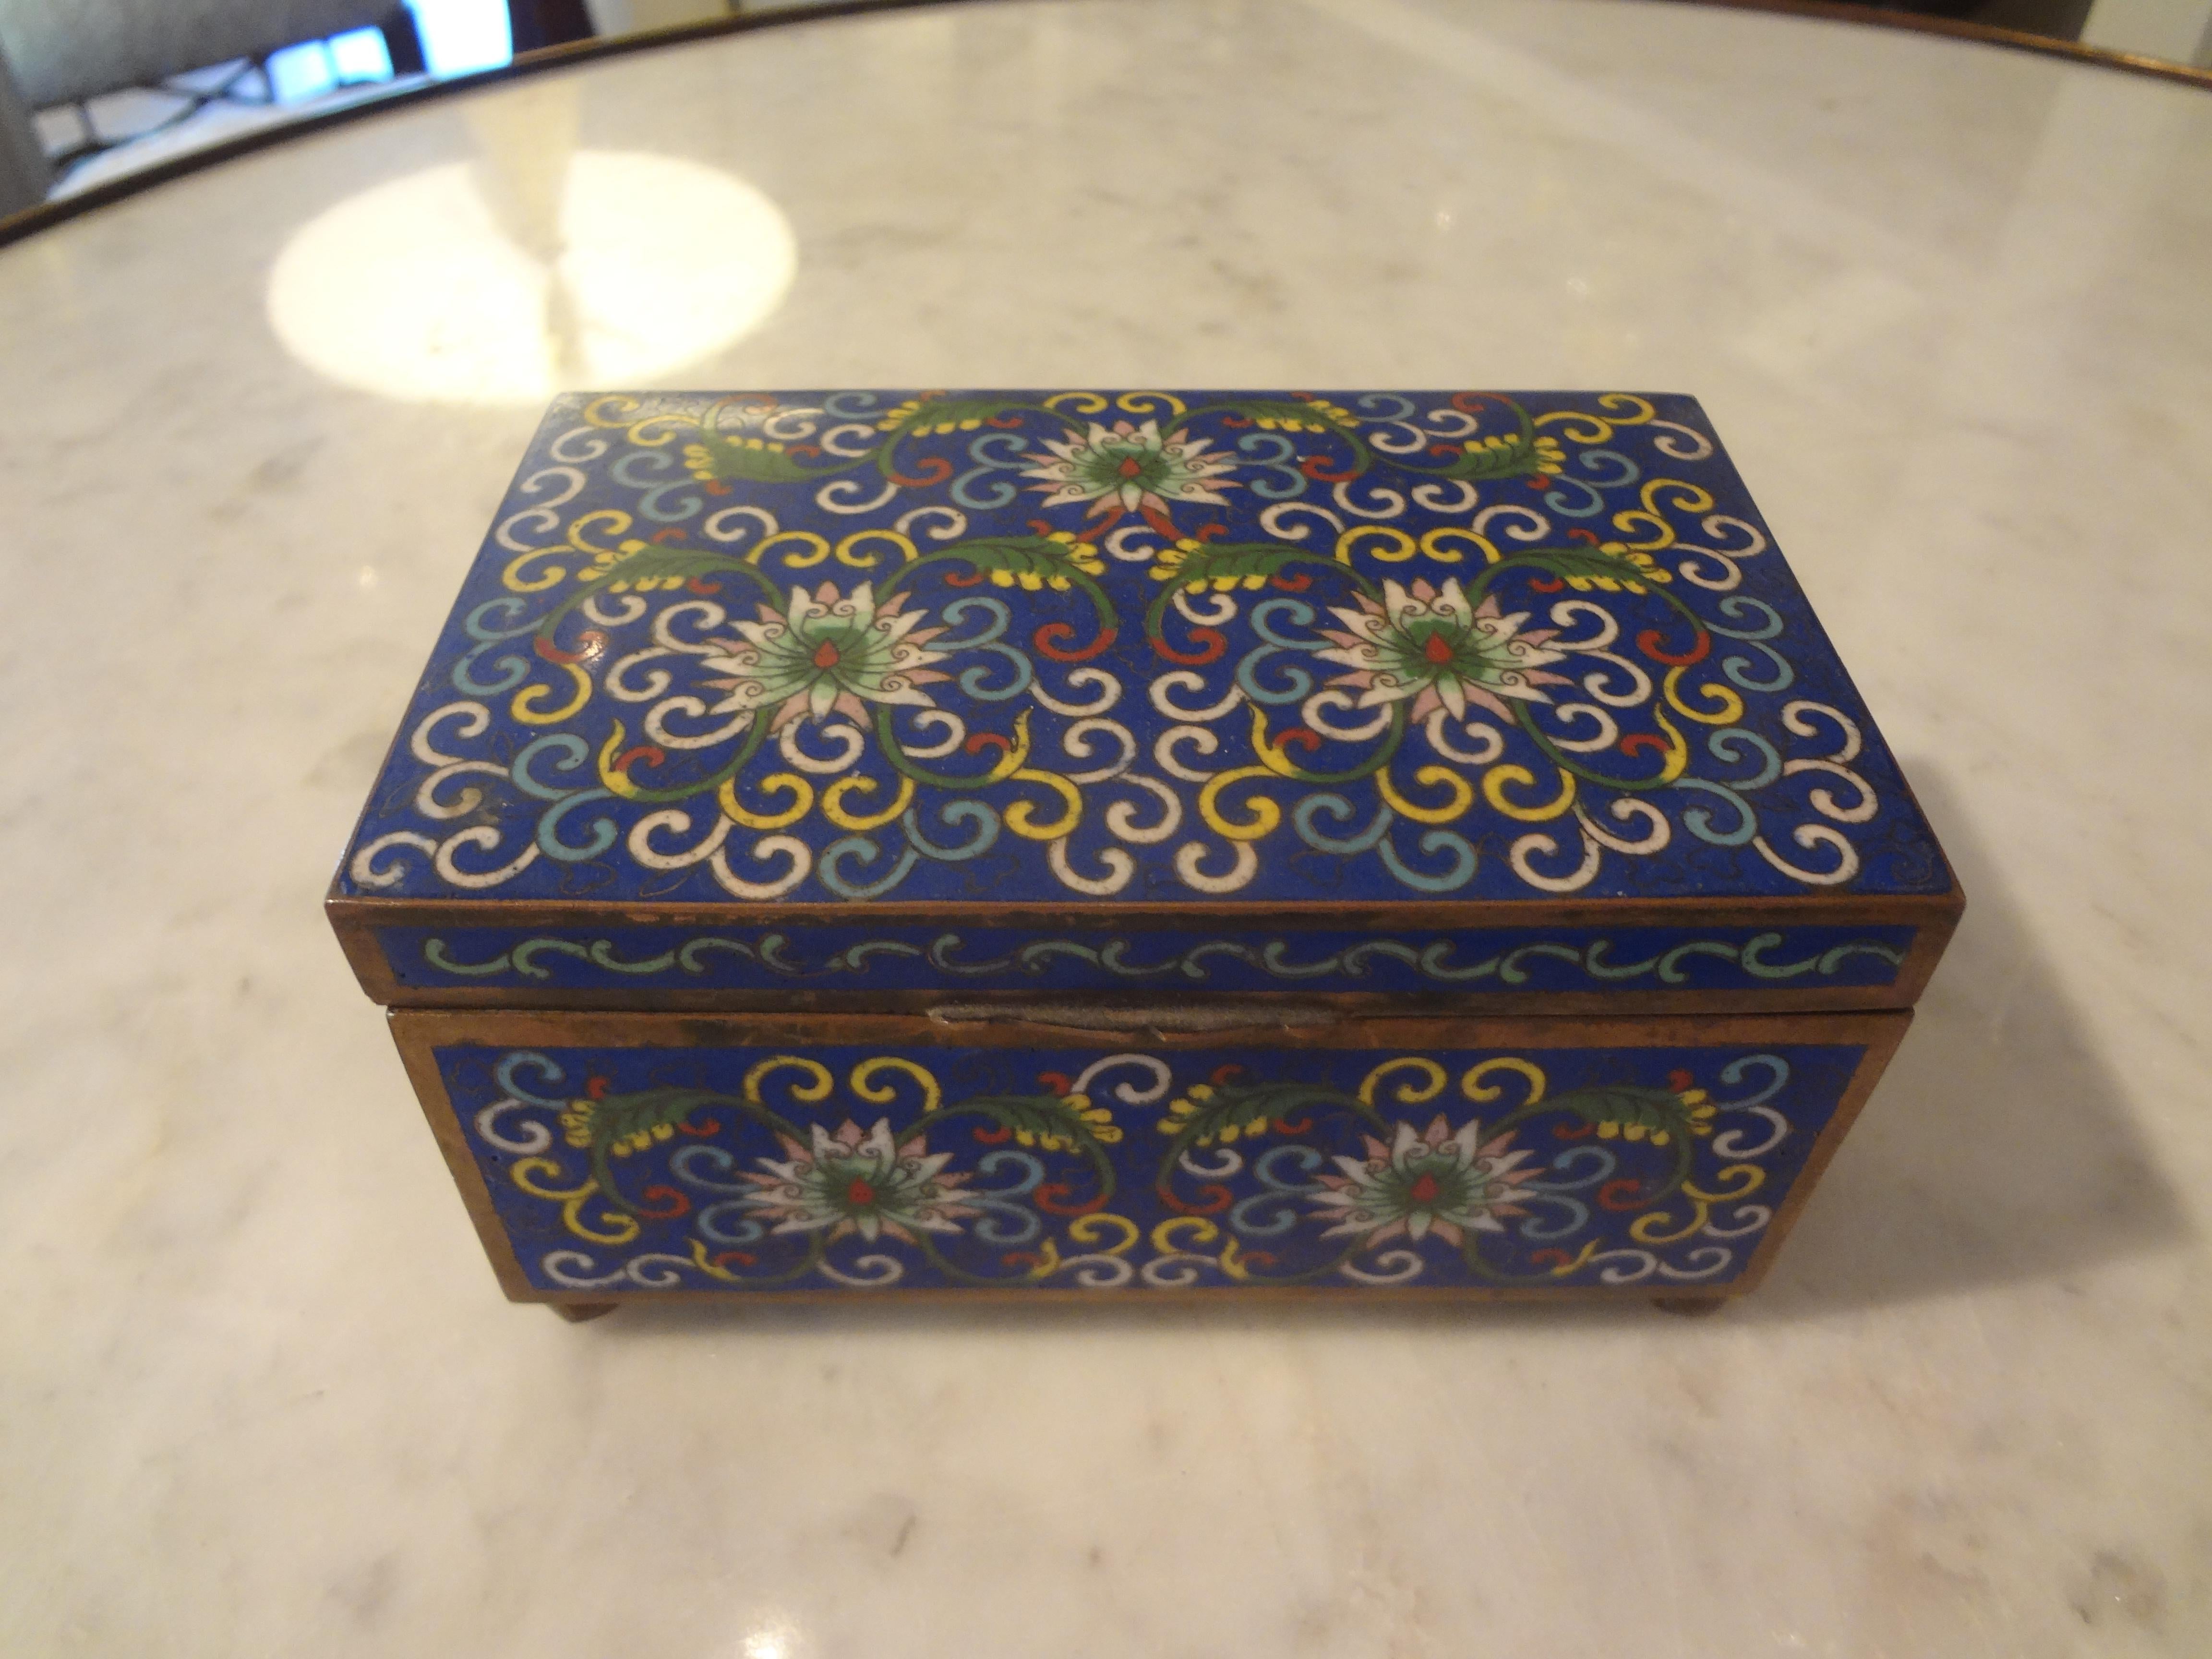 Lovely Chinese export cloisonné box made of brass and enameled with a beautiful floral pattern resting on ball feet. This chinoiserie box is marked China and dates from 1900-1920. This good sized decorative box was most likely a cigarette box or